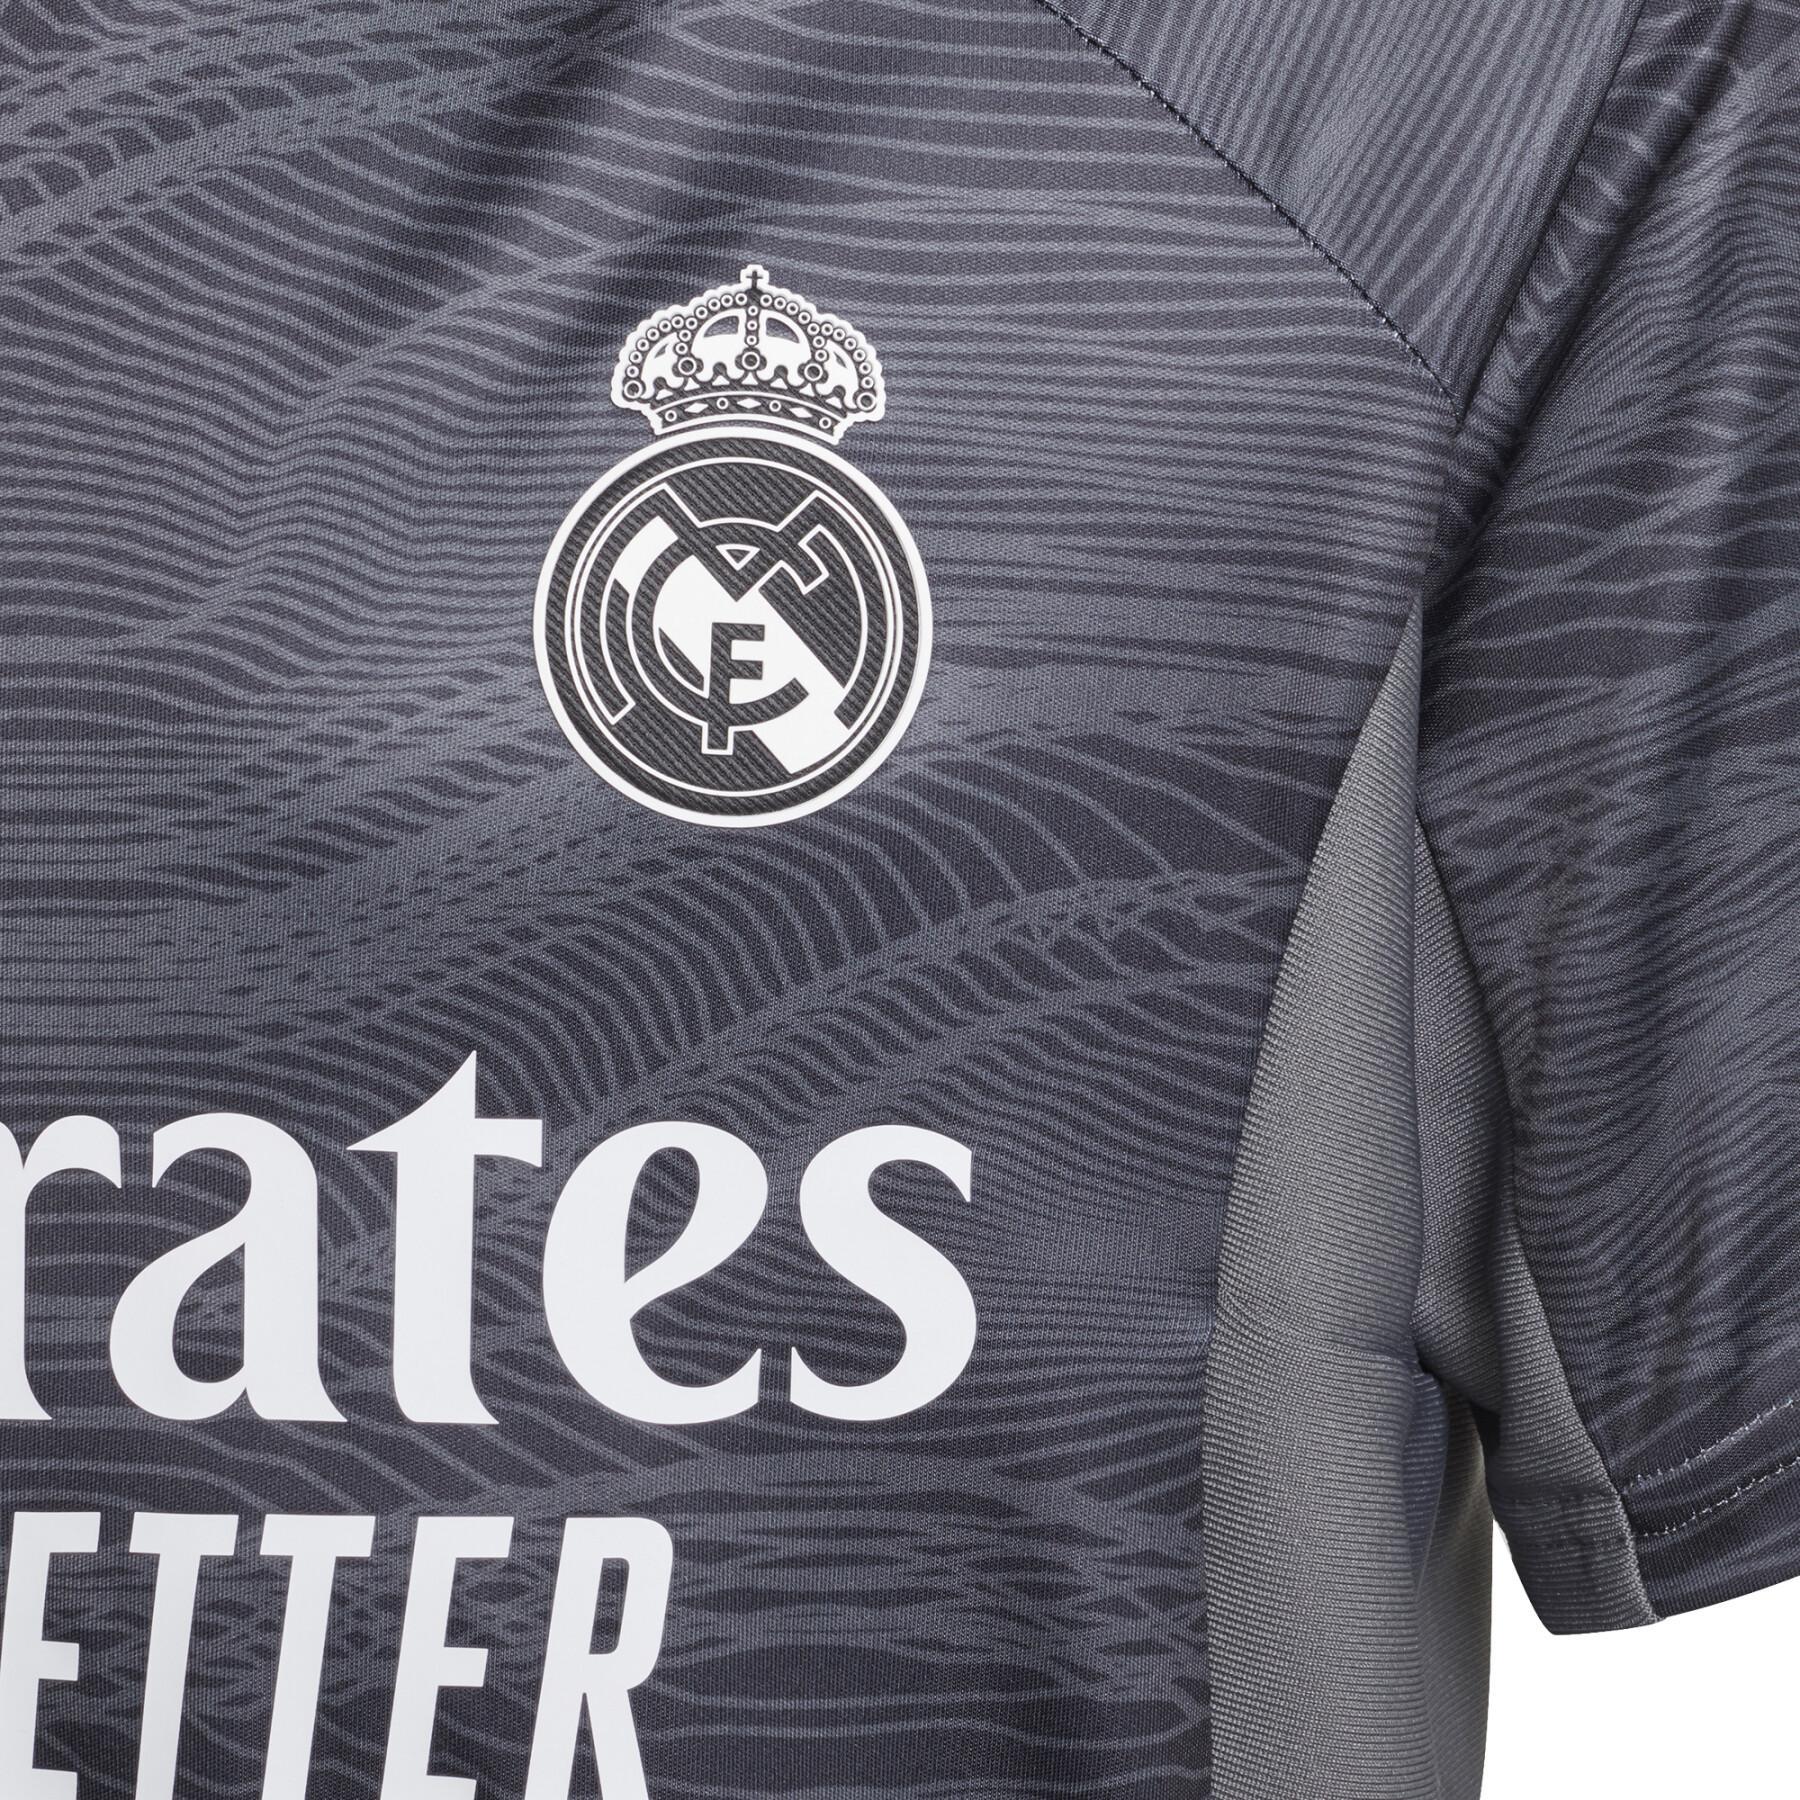 Child care home kit Real Madrid 2021/22